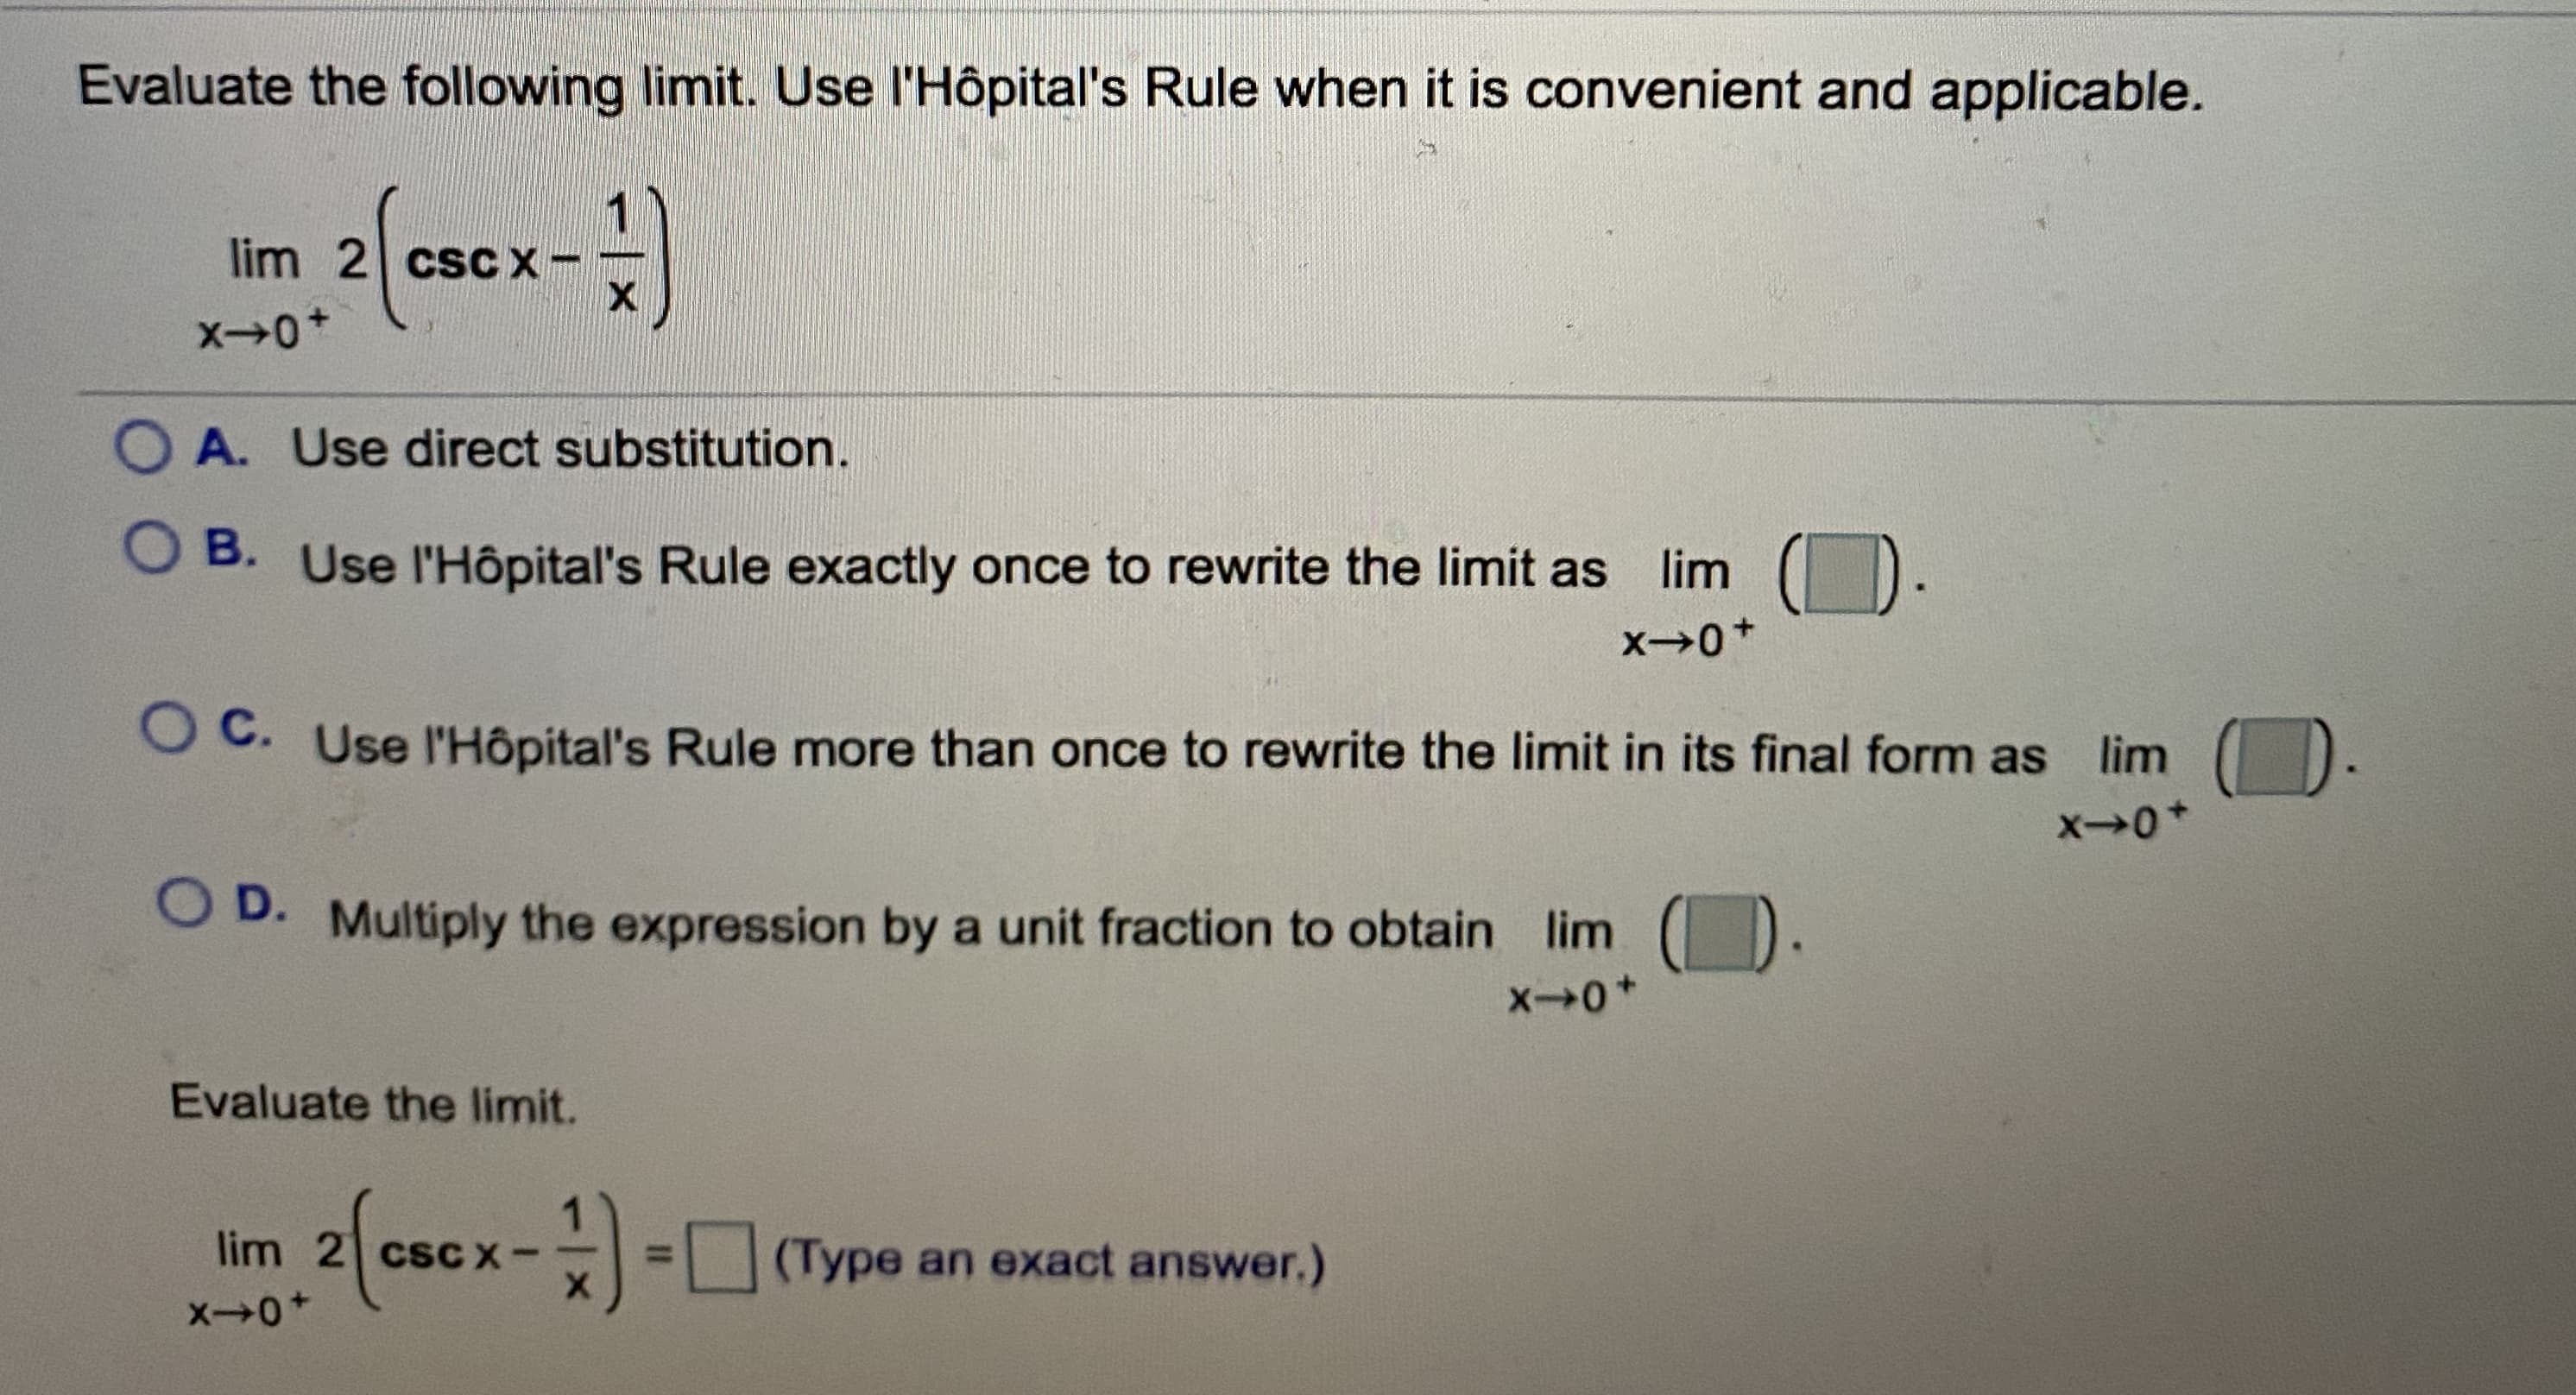 Evaluate the following limit. Use l'Hôpital's Rule when it is convenient and applicable.
2/3
lim 2 csC X-
O A. Use direct substitution.
B. Use l'Hôpital's Rule exactly once to rewrite the limit as lim
O C. Use l'Hôpital's Rule more than once to rewrite the limit in its final form as lim
O D. Multiply the expression by a unit fraction to obtain lim
Evaluate the limit.
2/-
lim 2 cscCX-
(Type an exact answer.)
